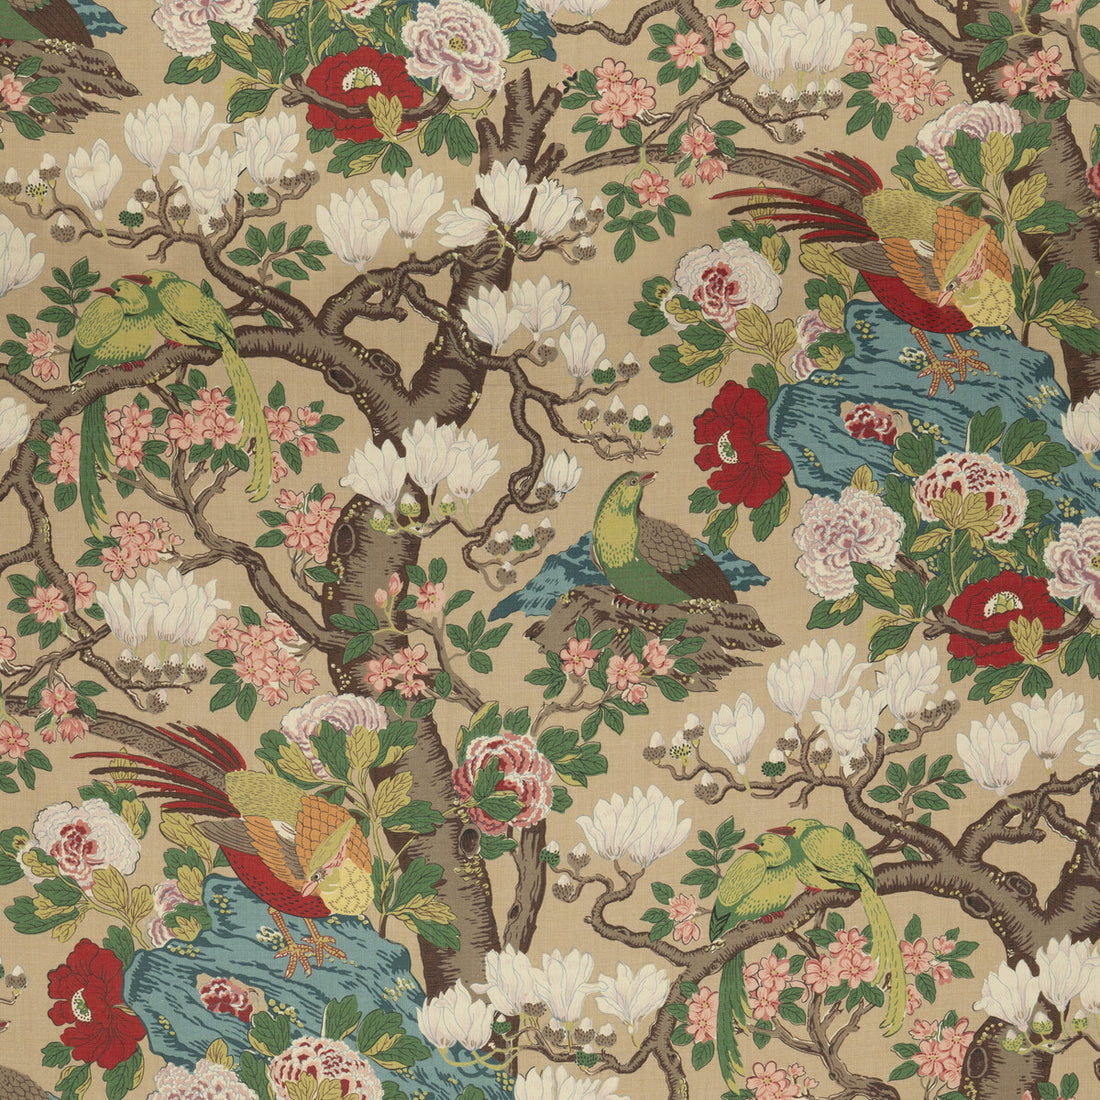 Rockbird Signature fabric in multi color - pattern BP10773.5.0 - by G P &amp; J Baker in the Signature Prints collection